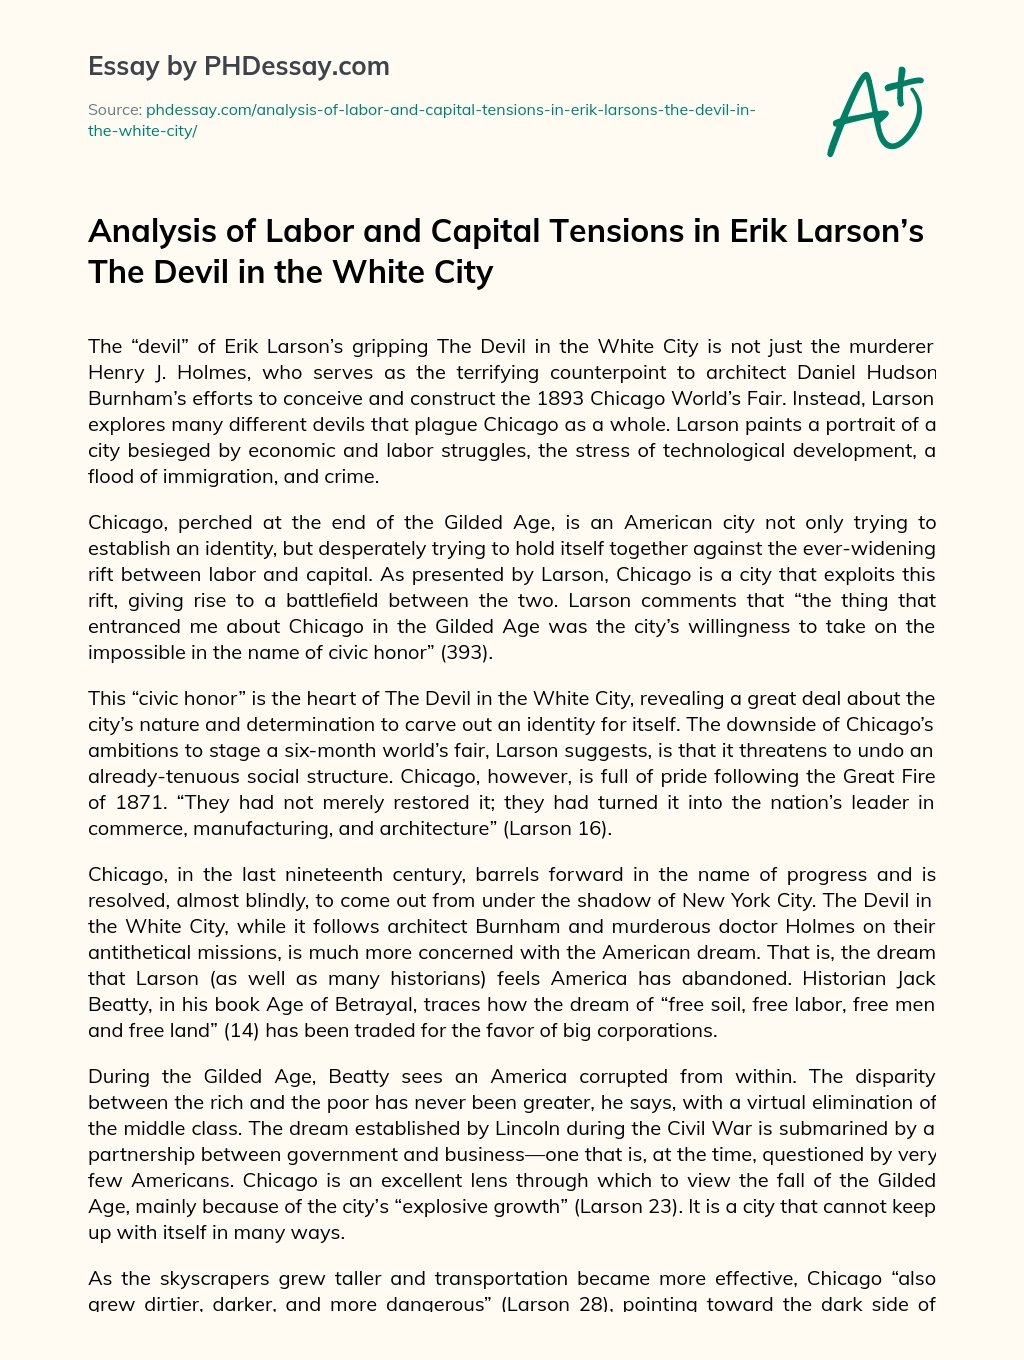 Analysis of Labor and Capital Tensions in Erik Larson’s The Devil in the White City essay